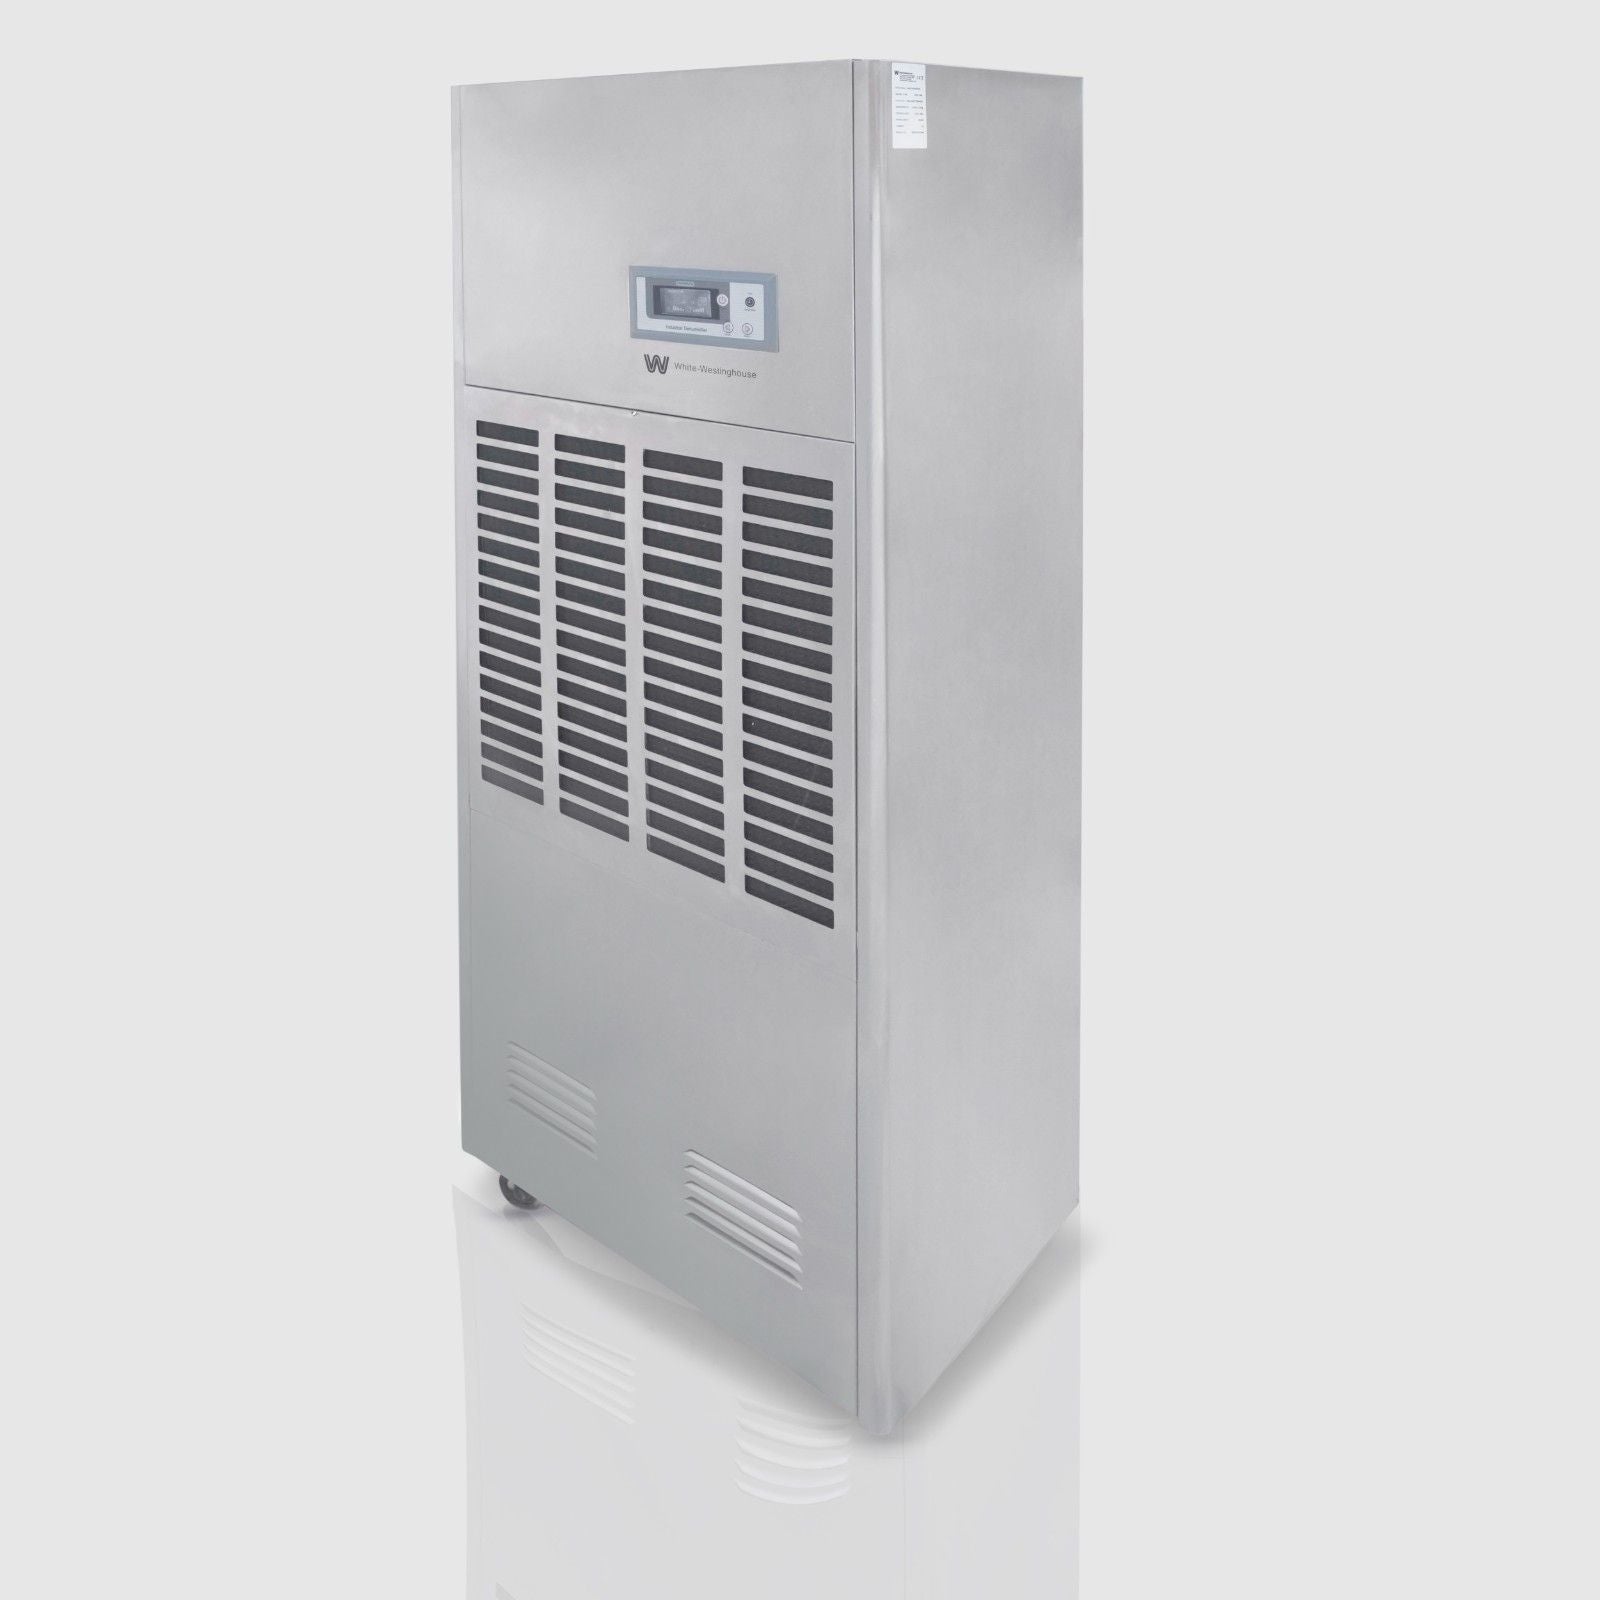 Angled view of the White Westinghouse Industrial Dehumidifier WDE168S, showing the sleek metal body, front air vents, and digital control panel. Features universal wheels for easy mobility and a robust design for industrial use. Ideal for maintaining optimal humidity levels in large commercial spaces, capable of removing 168 liters of moisture per day.